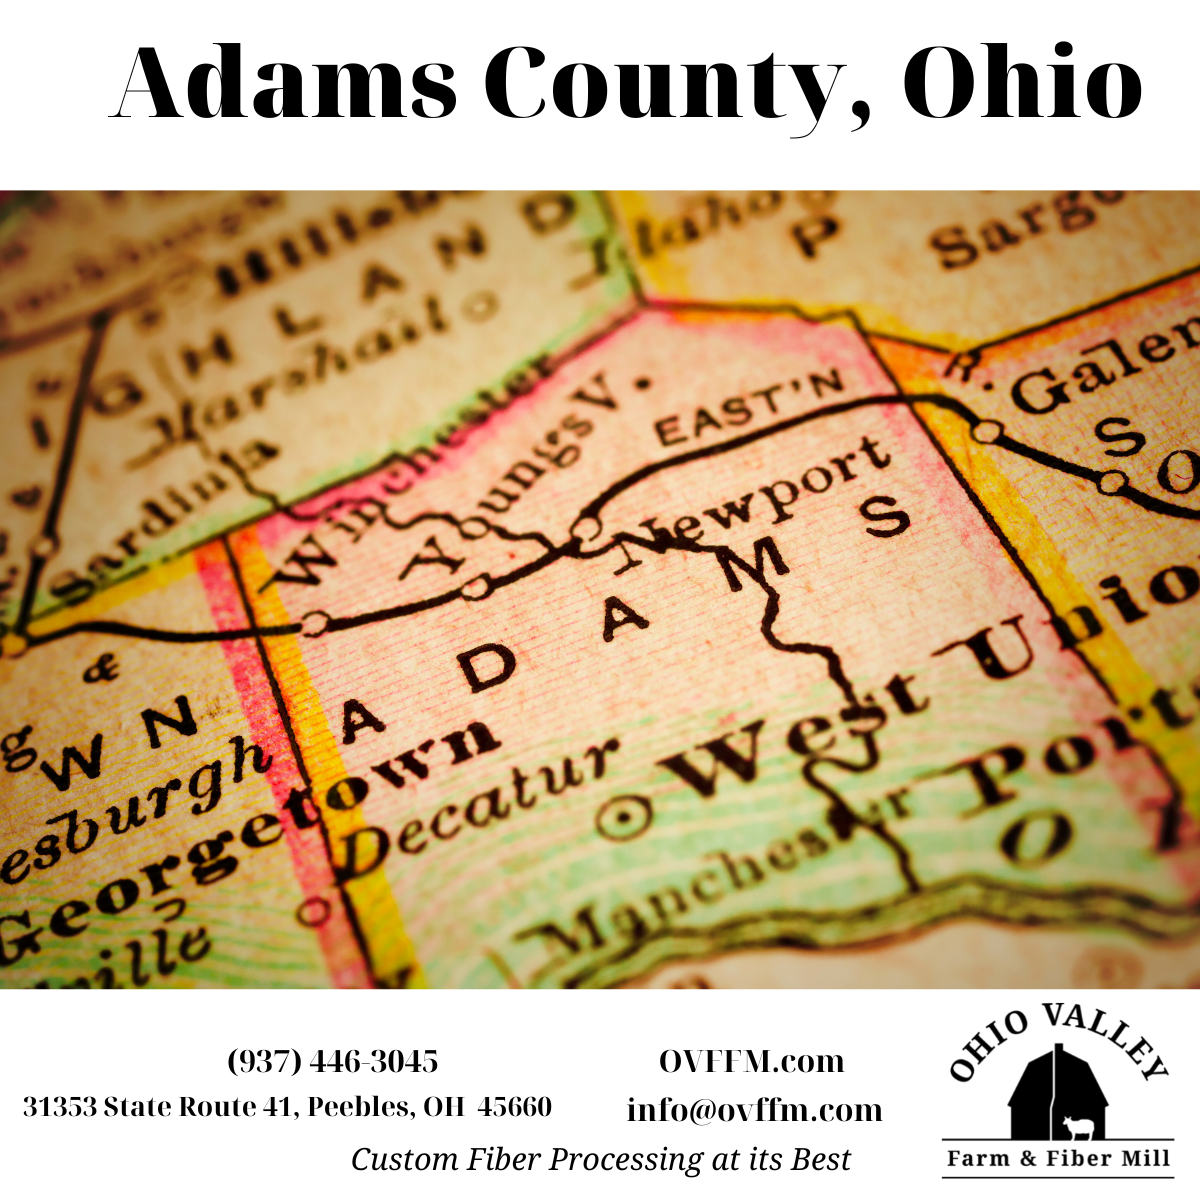 There's so much to do, see, and eat in Adams County Ohio besides visit with us at the Ohio Valley Farm and Fiber Mill.